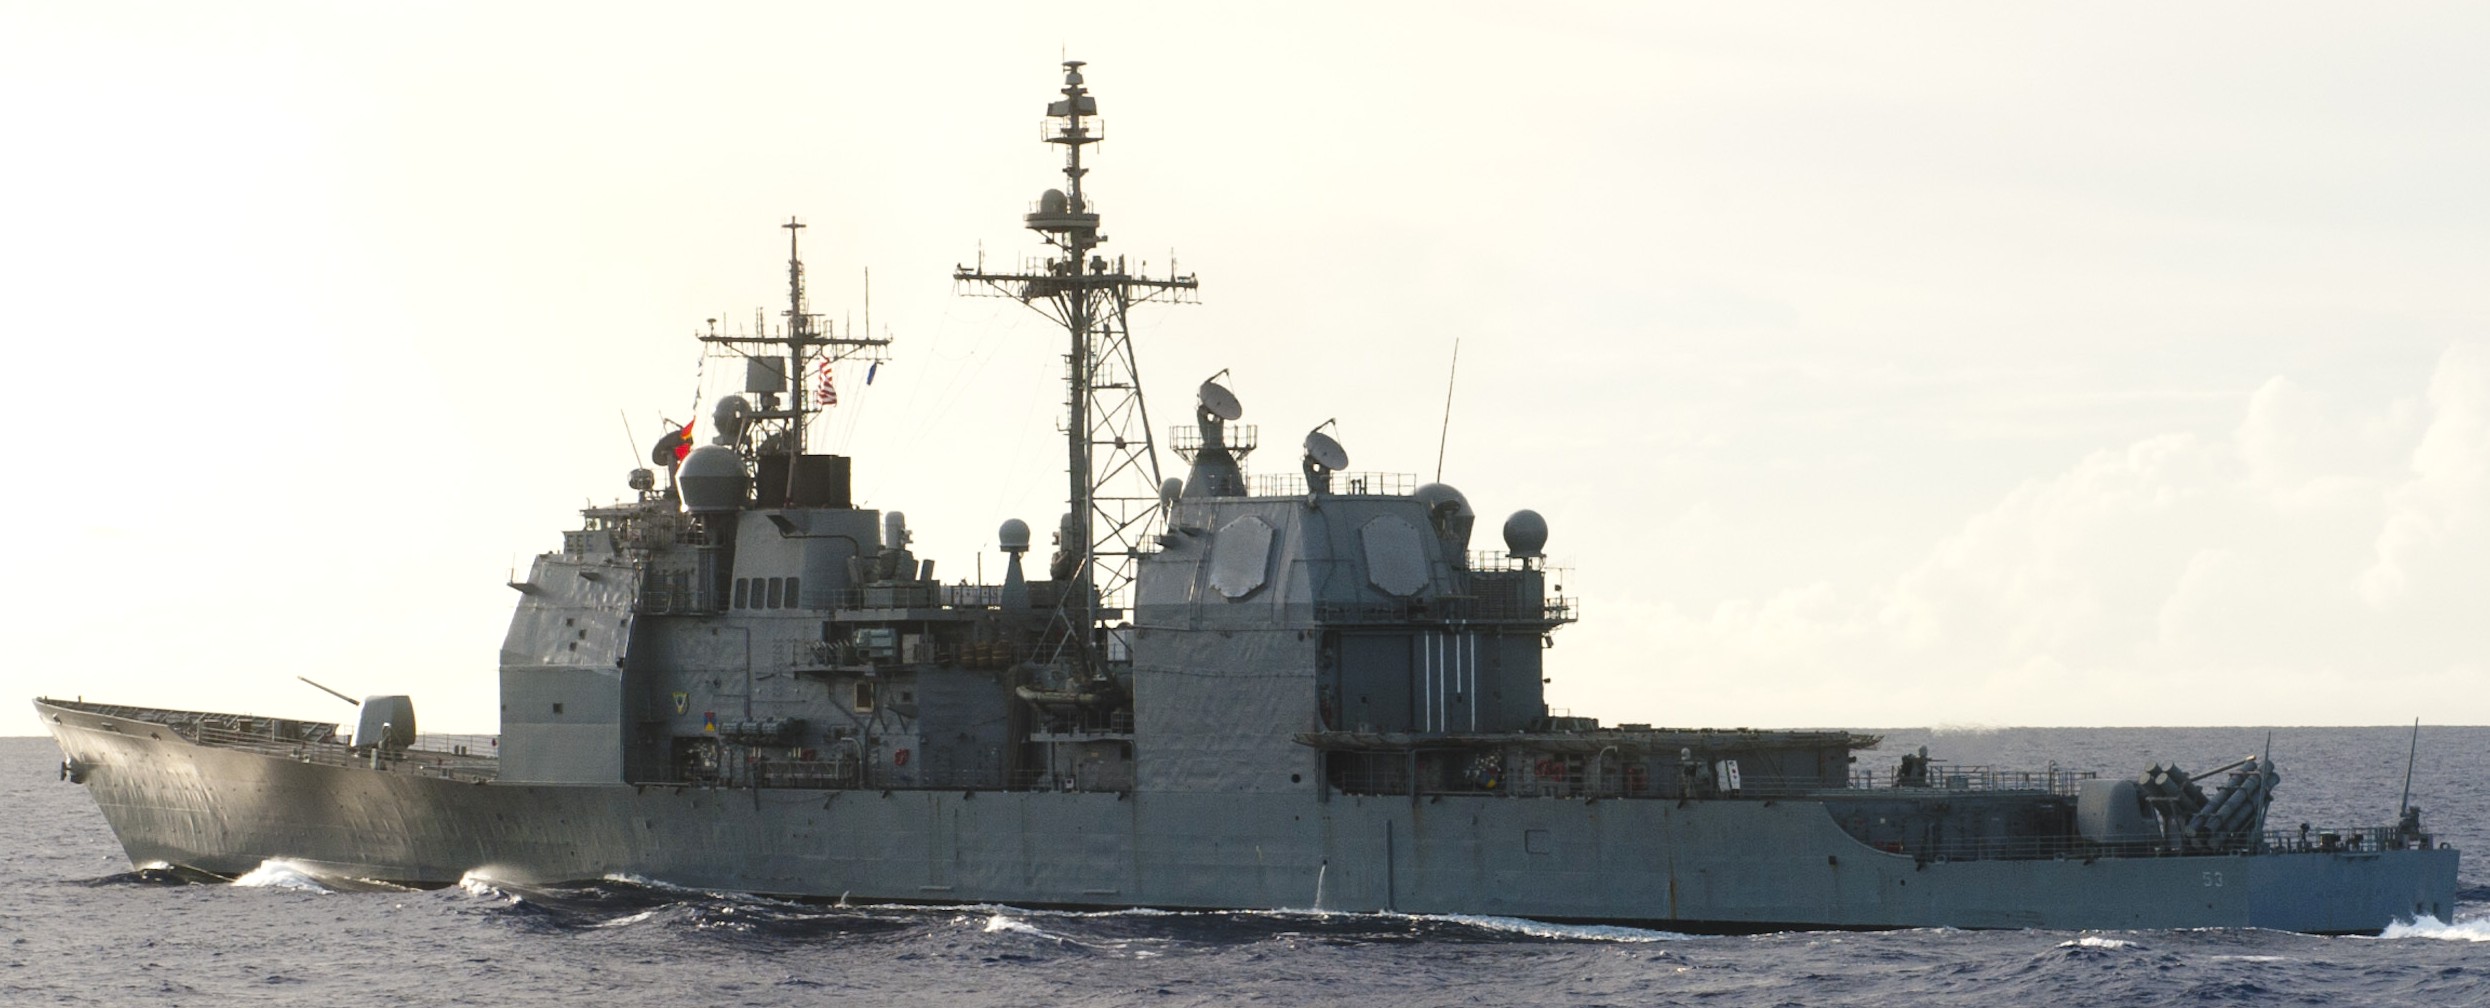 cg-53 uss mobile bay ticonderoga class guided missile cruiser aegis us navy 56